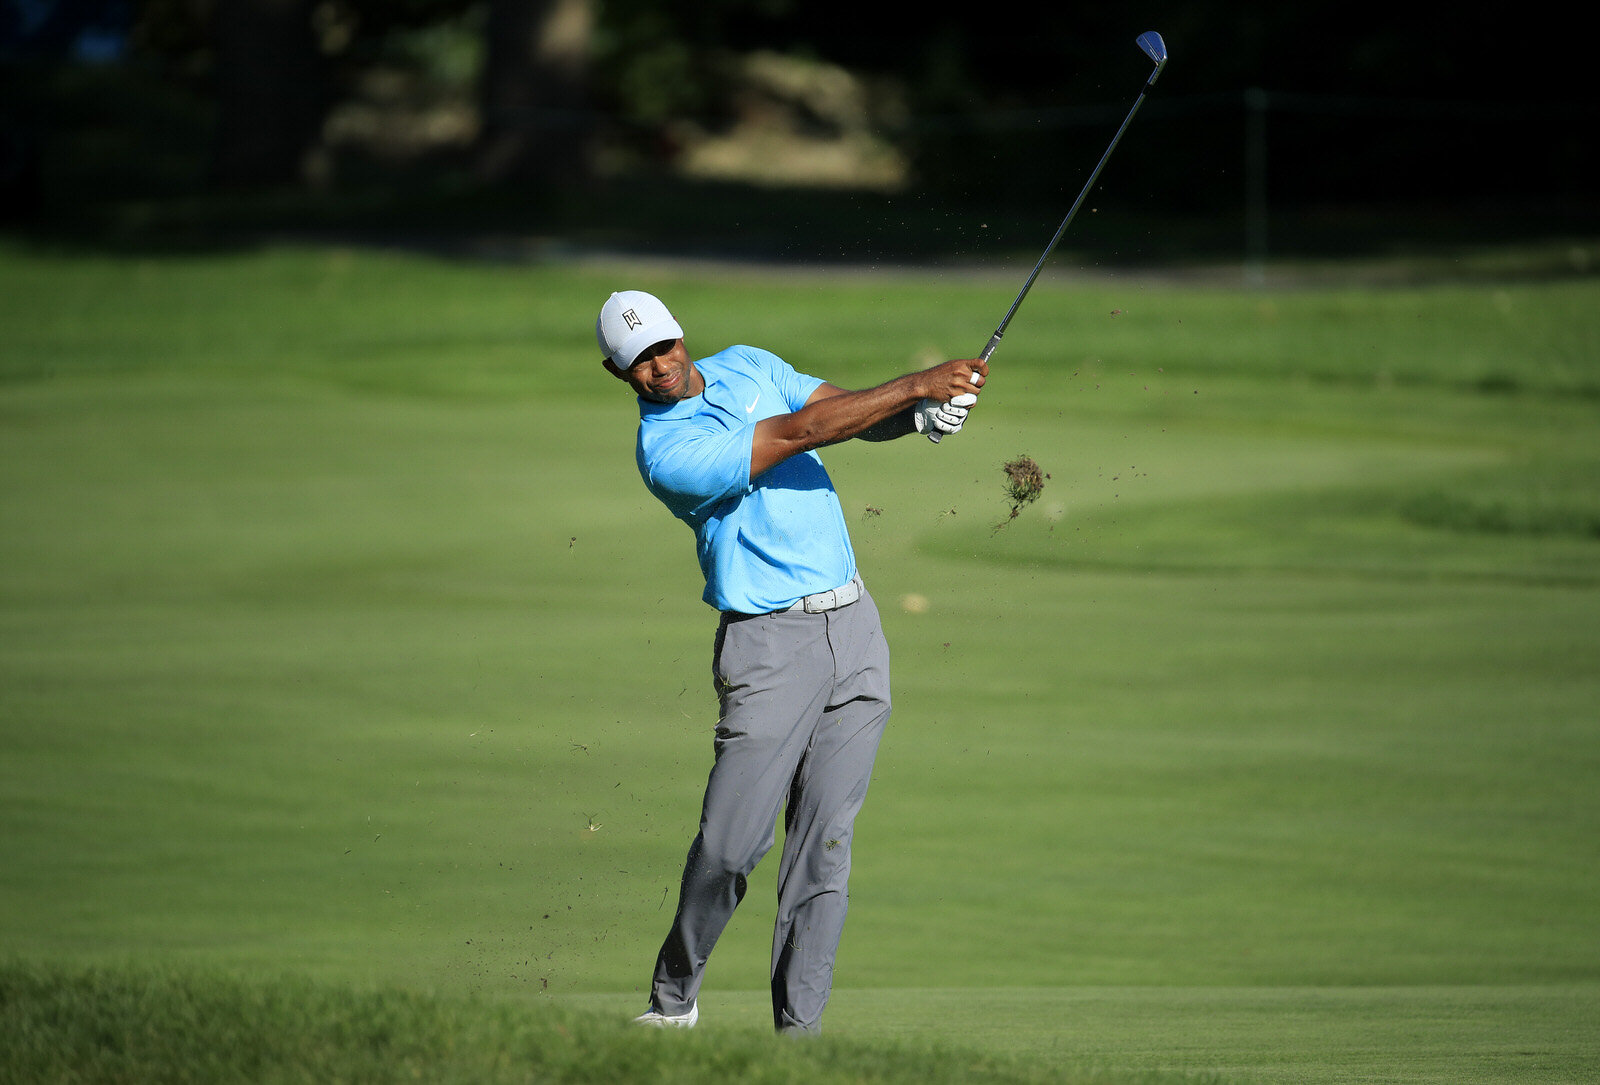  OLYMPIA FIELDS, ILLINOIS - AUGUST 27: Tiger Woods of the United States plays a second shot on the seventh hole during the first round of the BMW Championship on the North Course at Olympia Fields Country Club on August 27, 2020 in Olympia Fields, Il